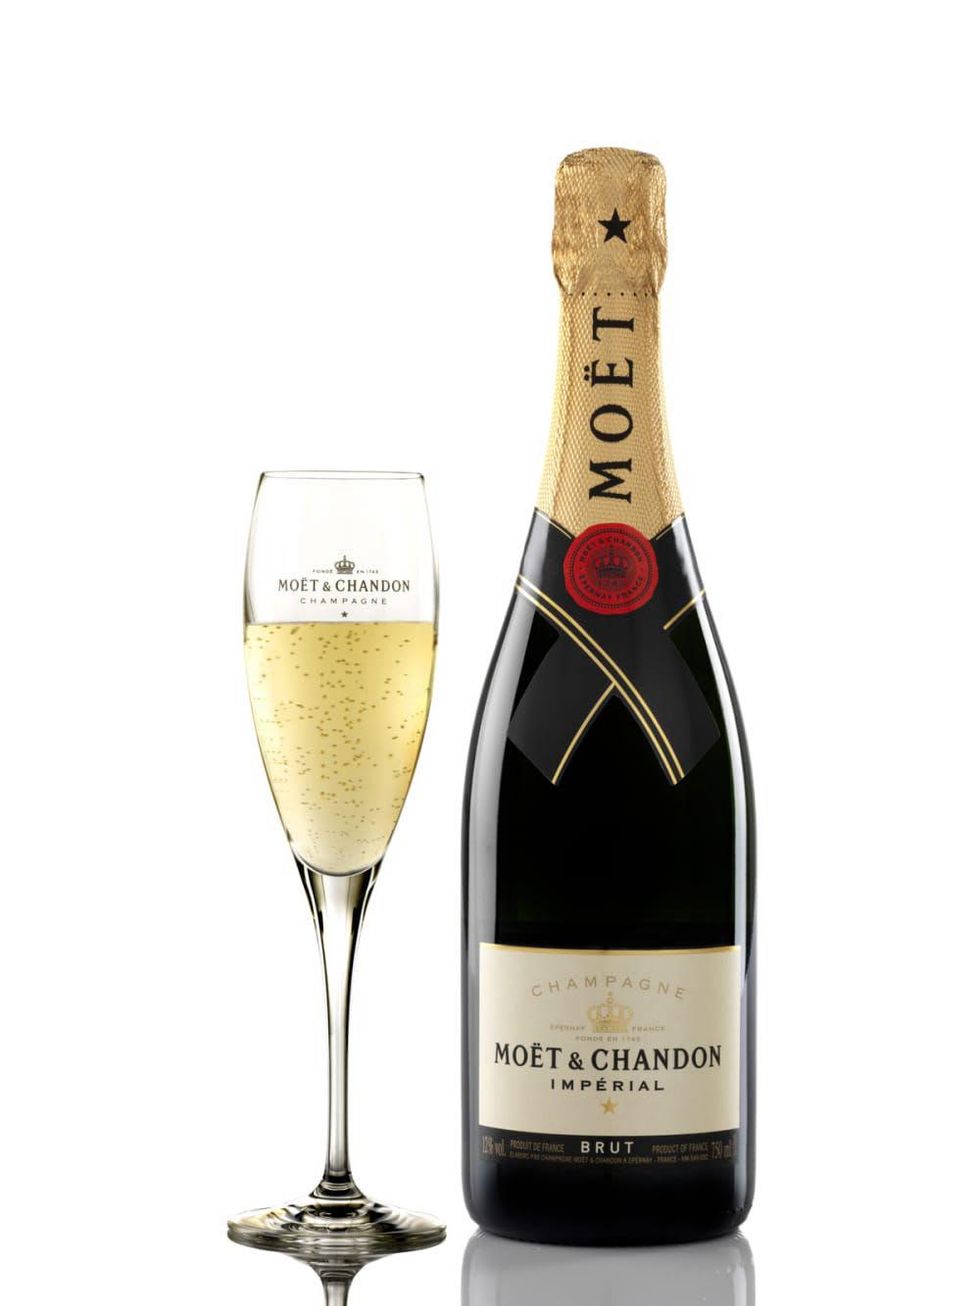 Moet & Chandon Imperial with Flute, champagne